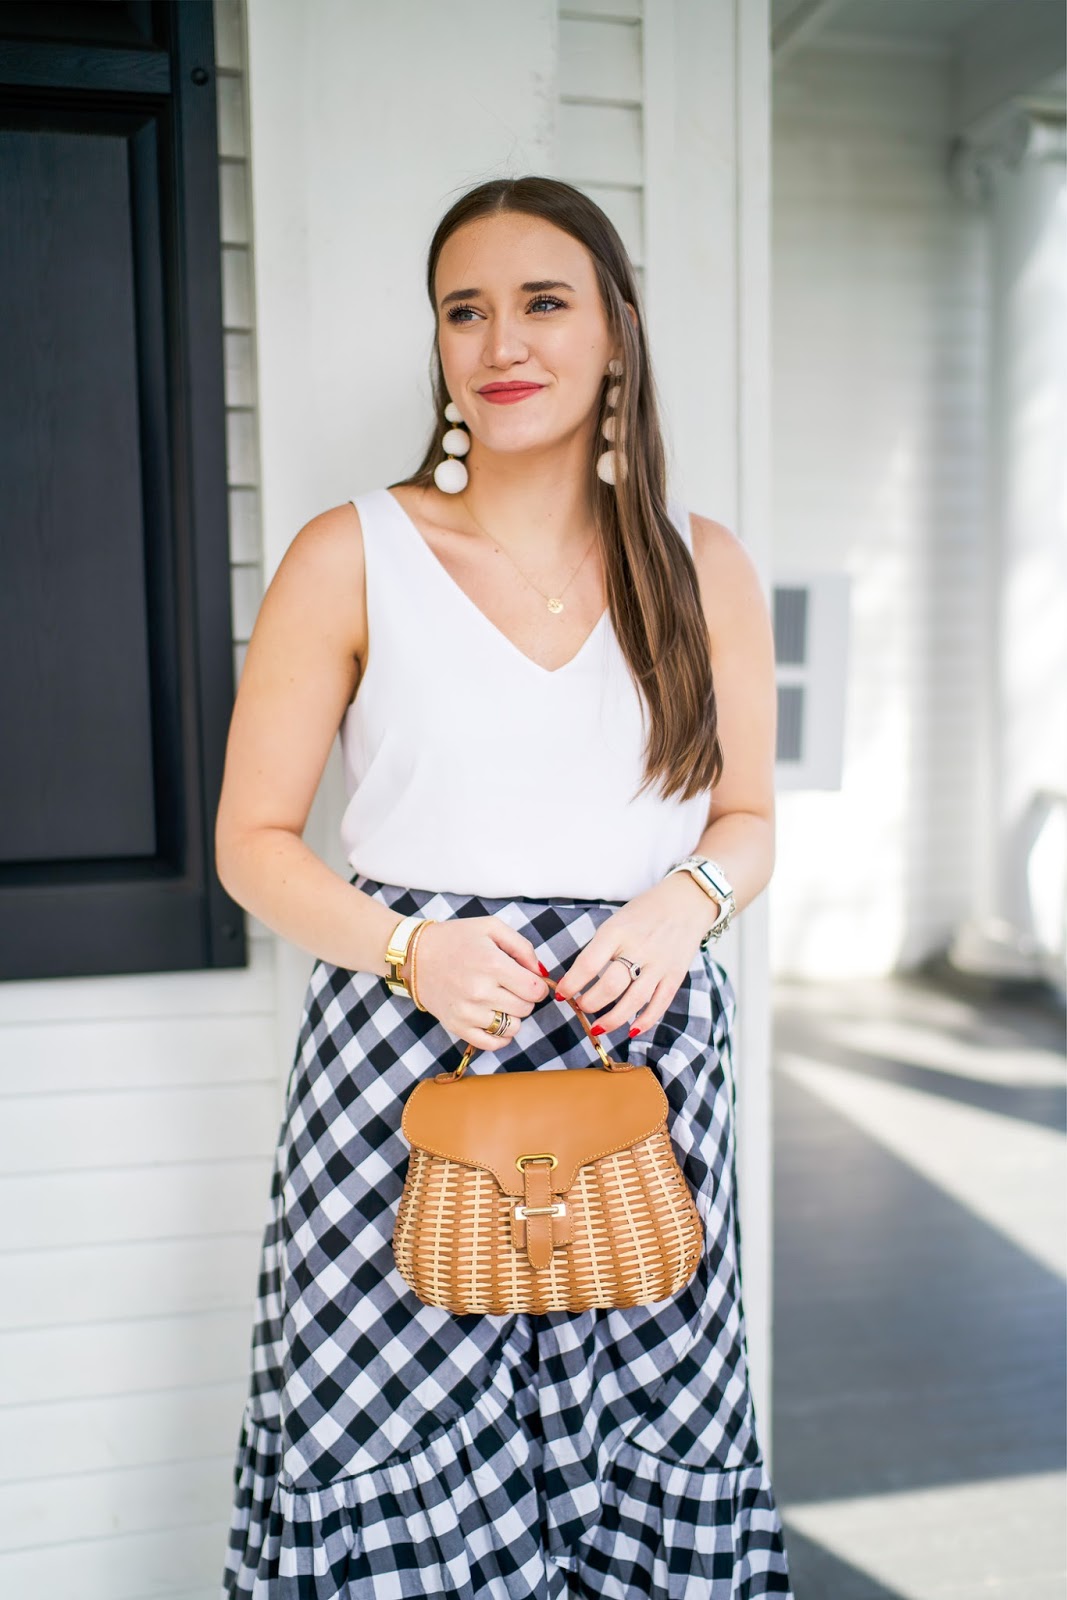 Bridal Shower Outfit styled by popular New York fashion blogger Covering the Bases